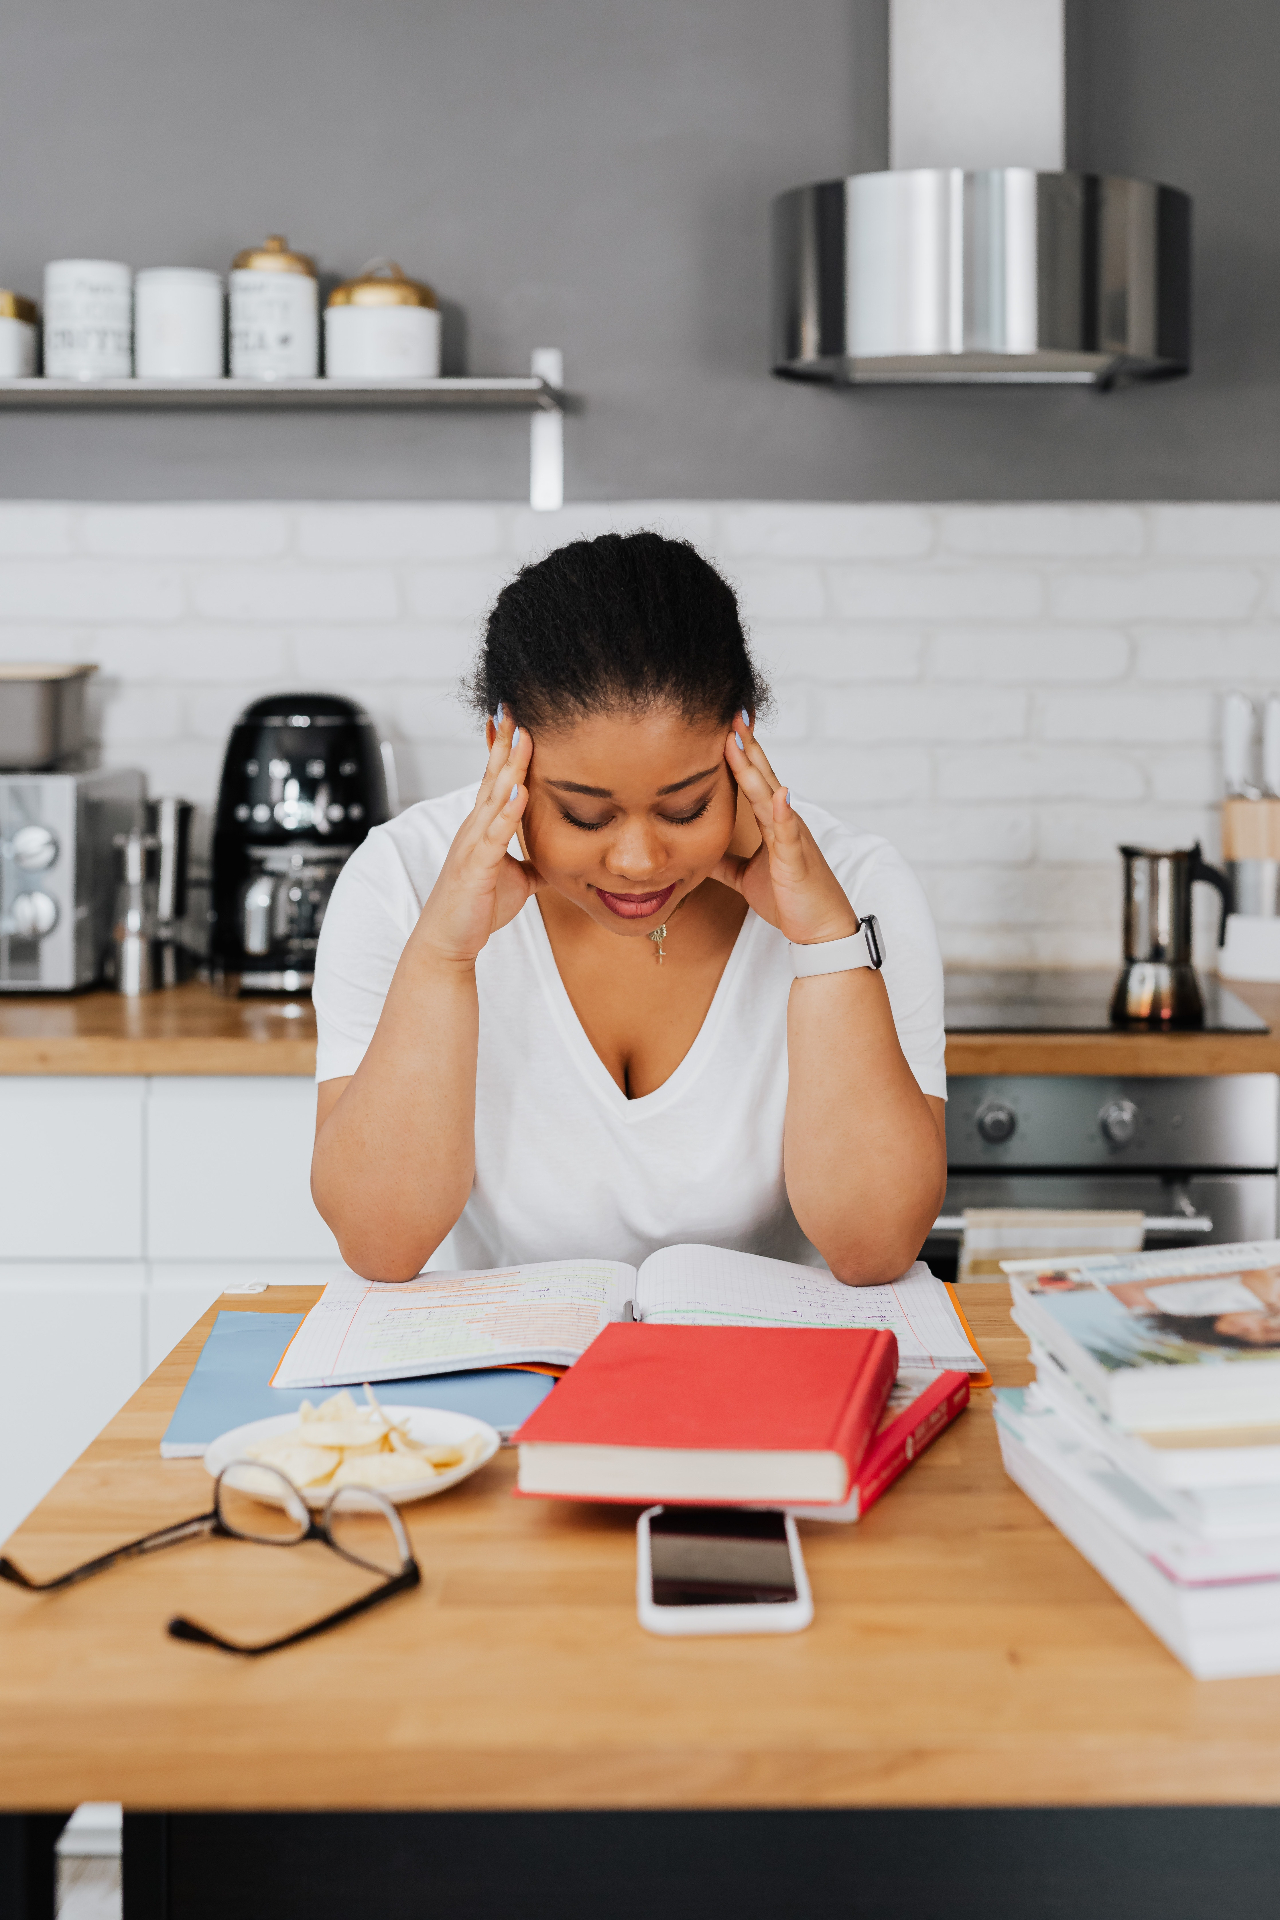 Image of a woman sitting at a table leaning over books with her hands on her head looking stressed. After suffering from a traumatic brain injury or concussion, adult neuropsychological testing in Saint Petersburg, FL can help you address your injury and cope in healthy ways.